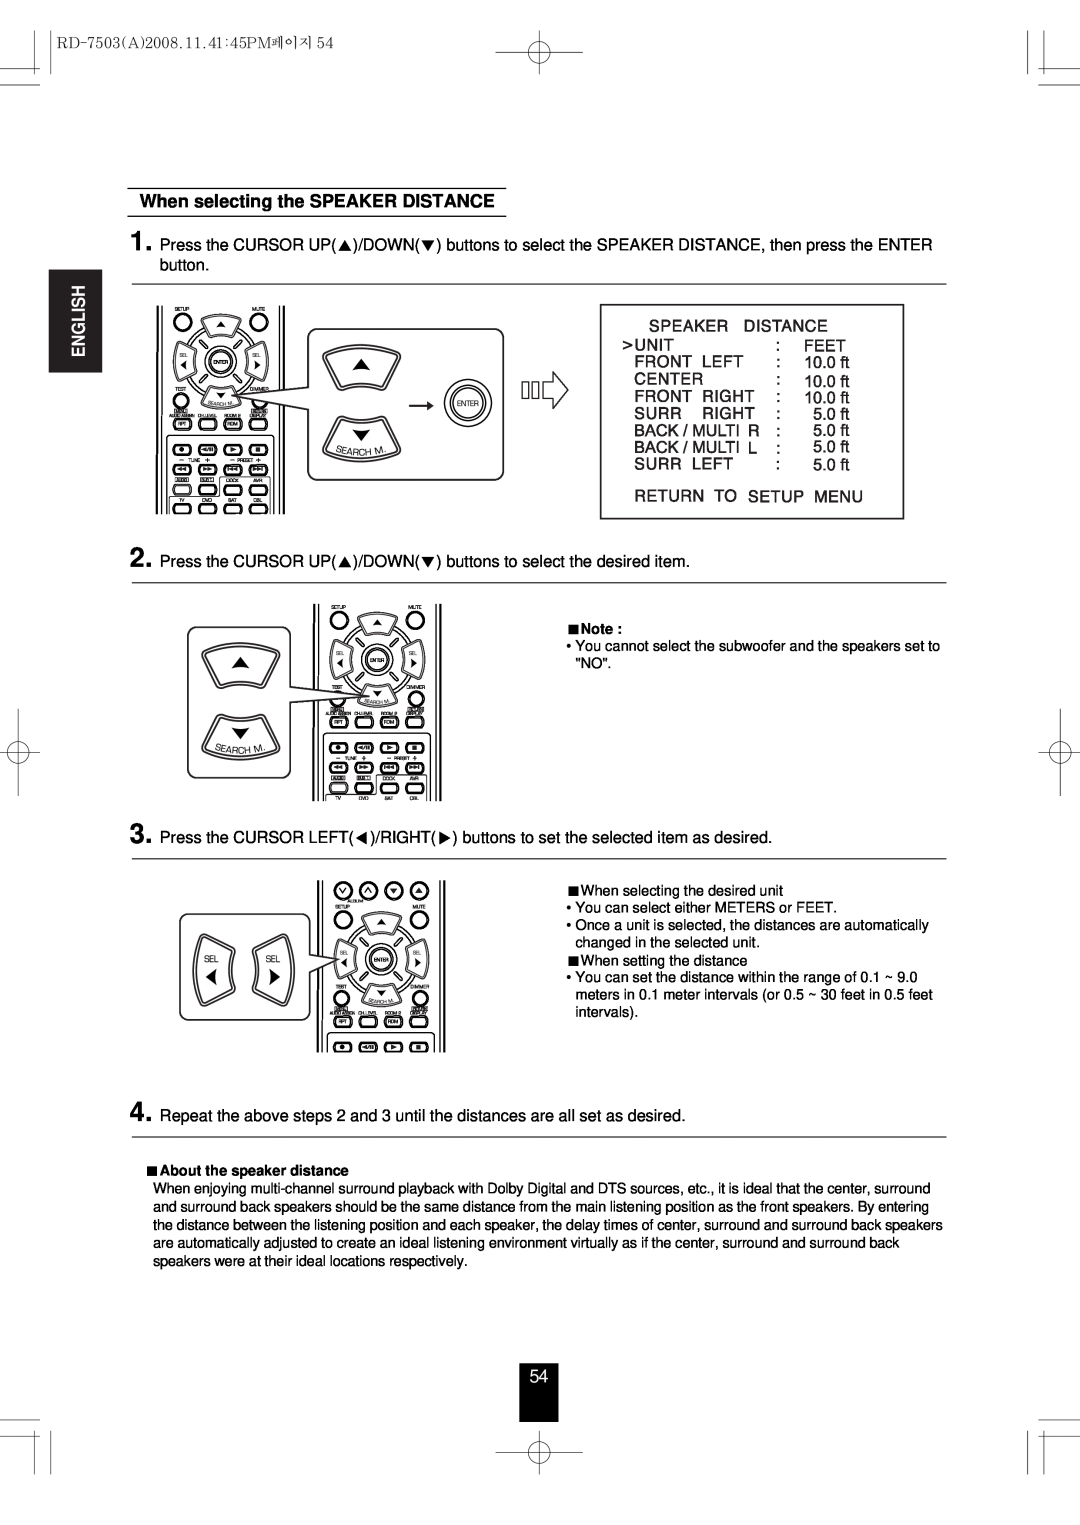 Sherwood RD-7503 manual When selecting the SPEAKER DISTANCE, English, About the speaker distance 